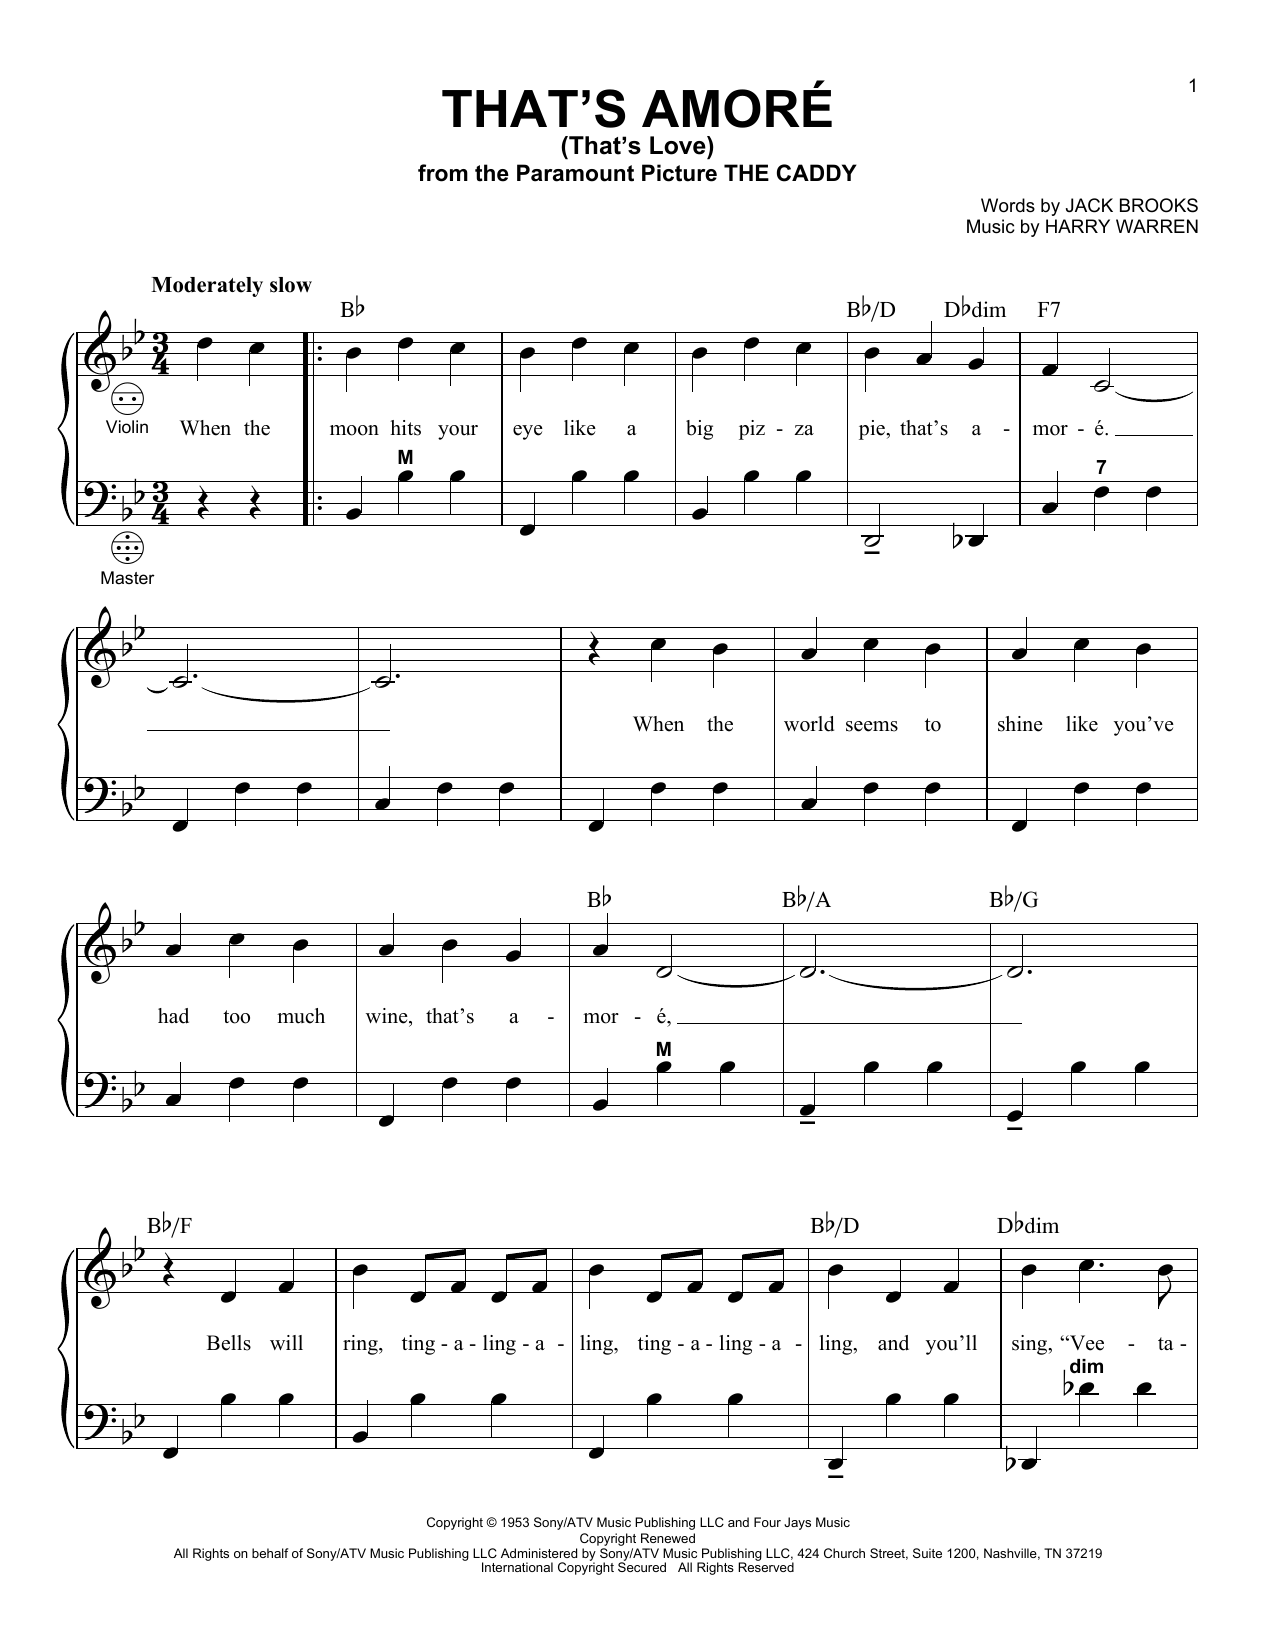 That's Amore (That's Love) sheet music